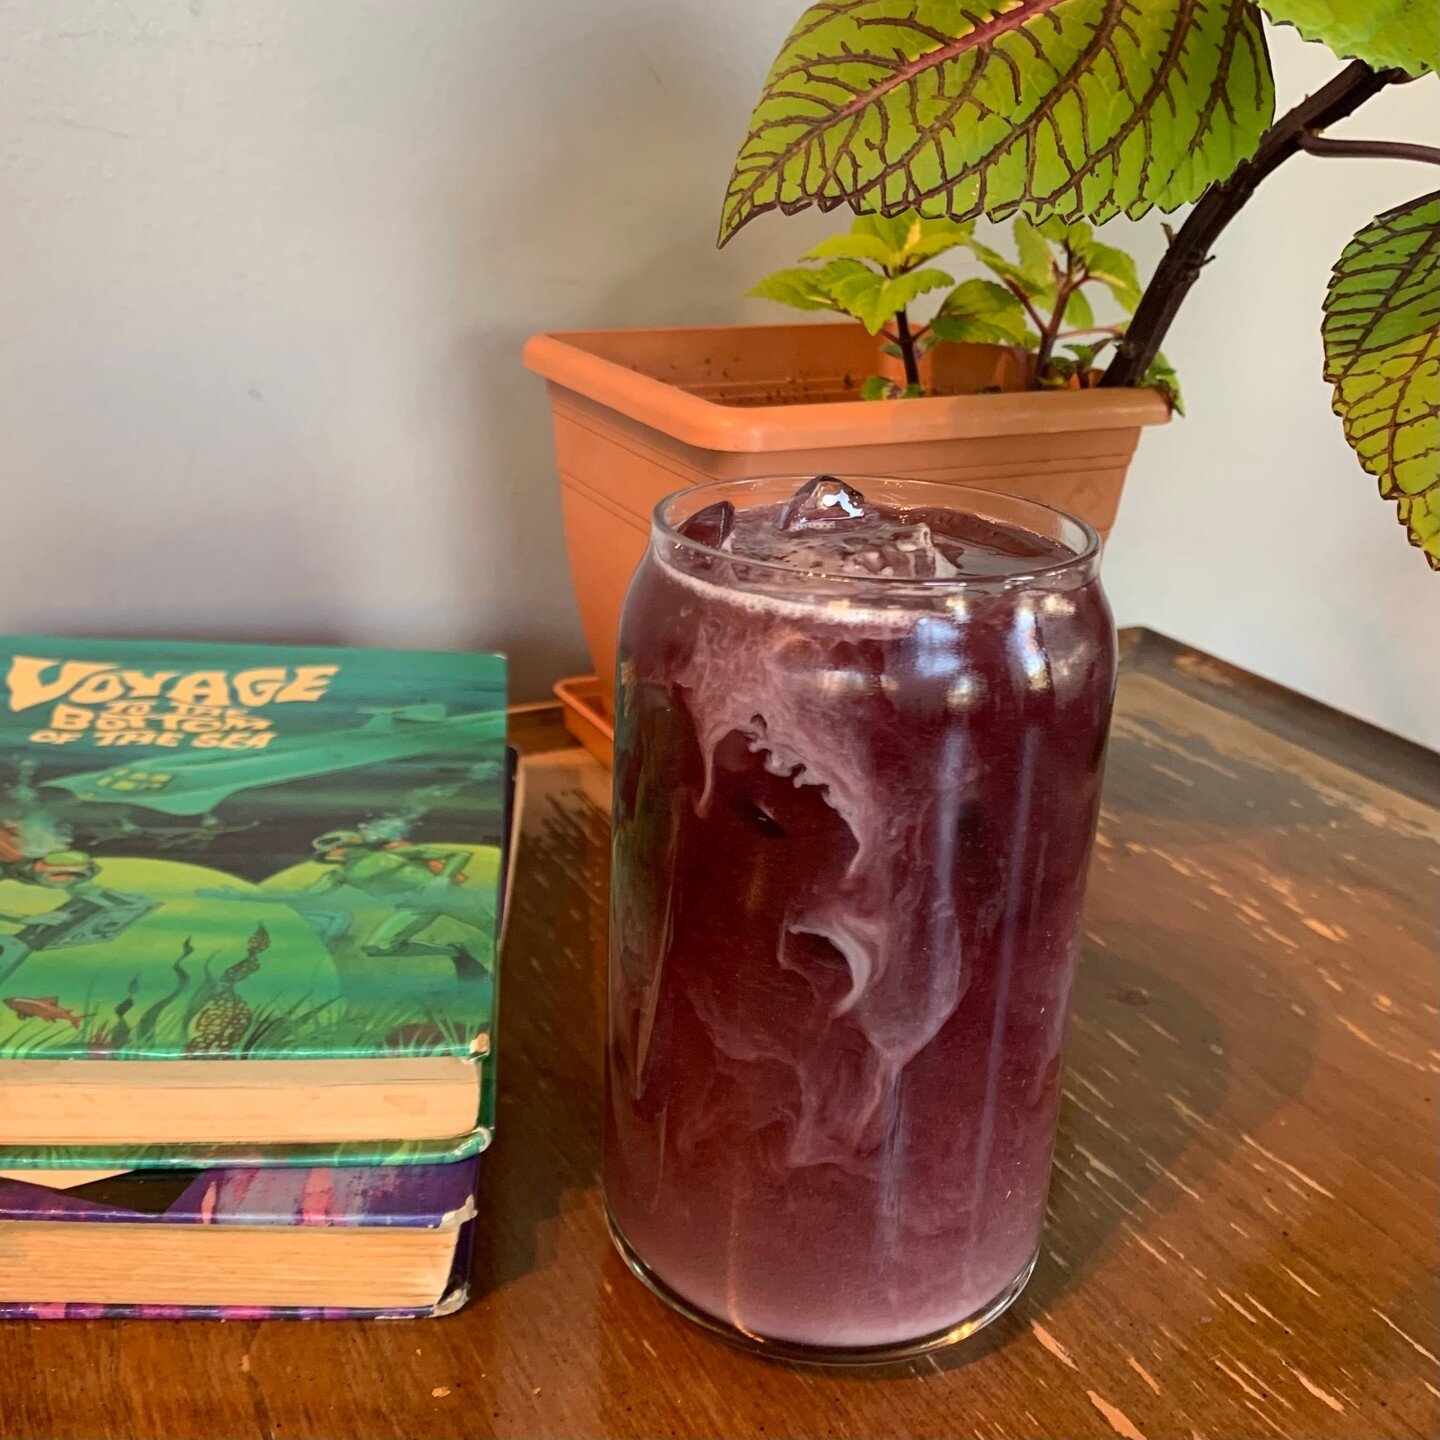 The blueberries have reappeared!

Our Midnight Ryder is back to stay until the blueberries disappear (again)! Come try it today! 

@bluemindroasting cold brew with oat milk and house blueberry tincture.